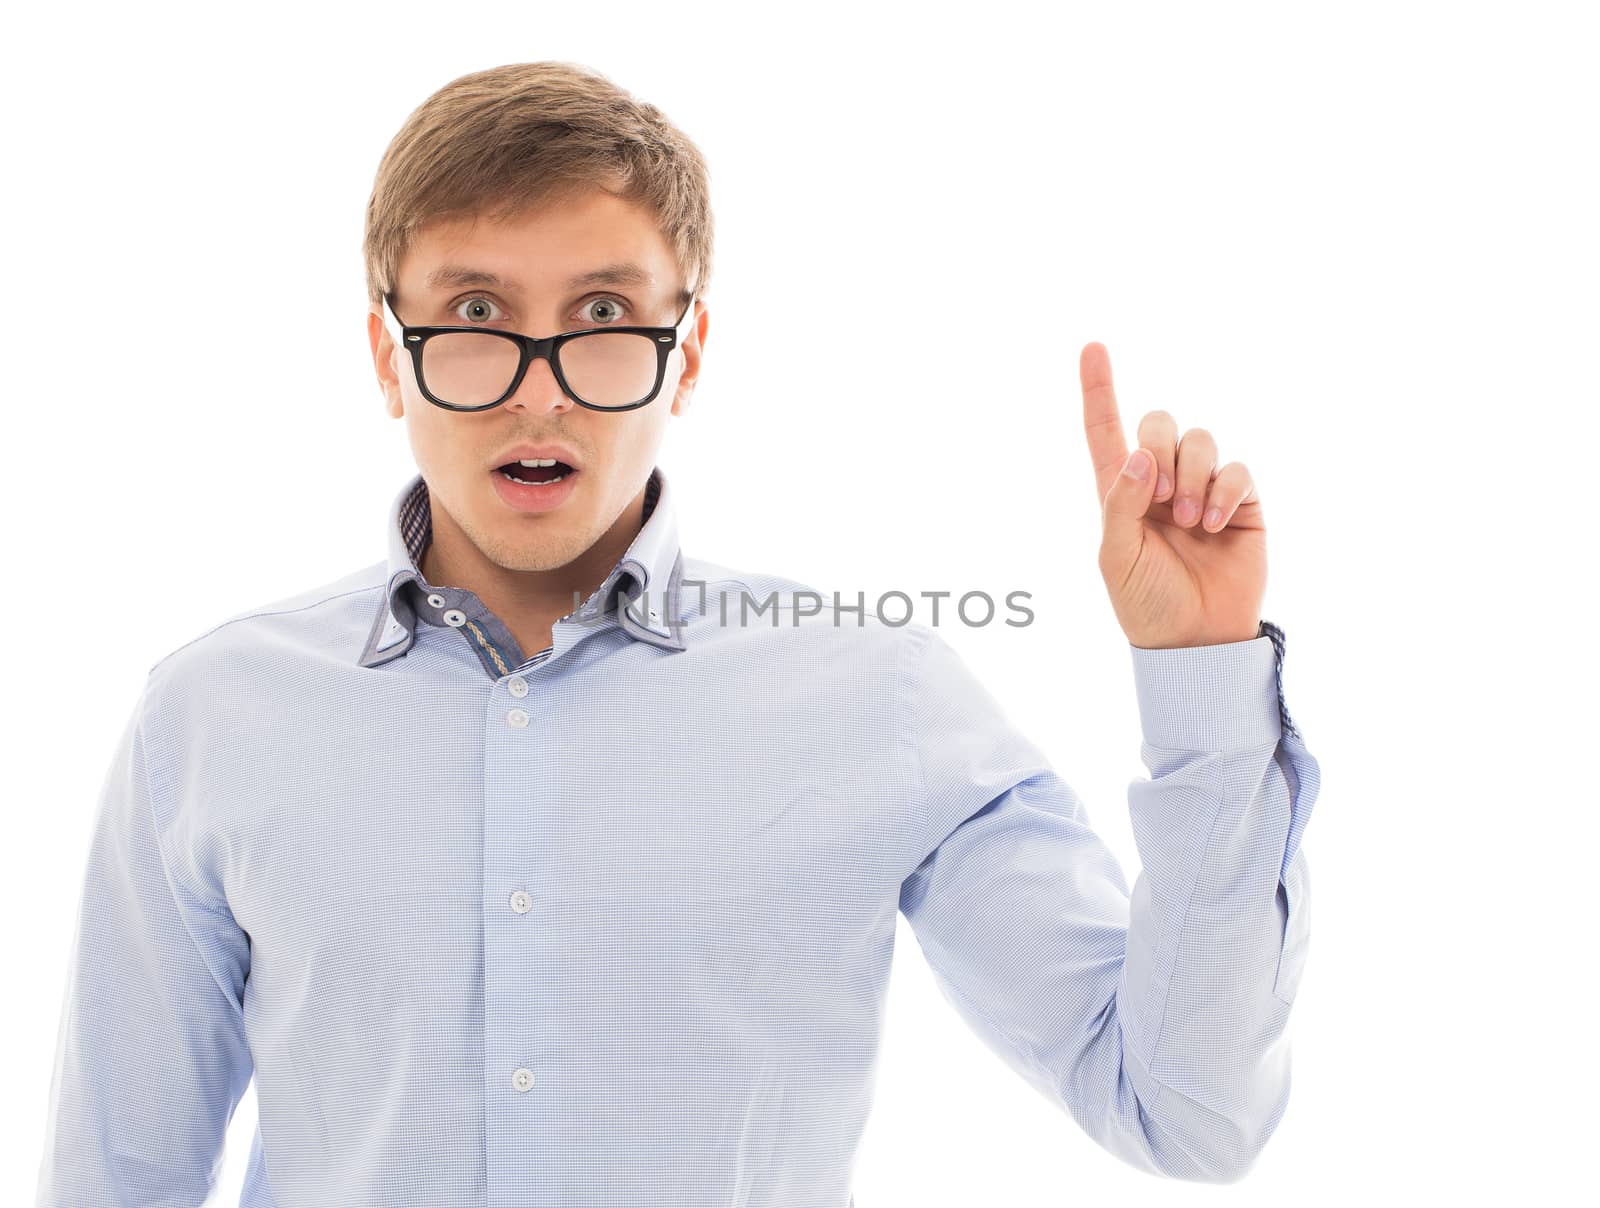 Handsome man in a blue shirt and glasses points up over a white background